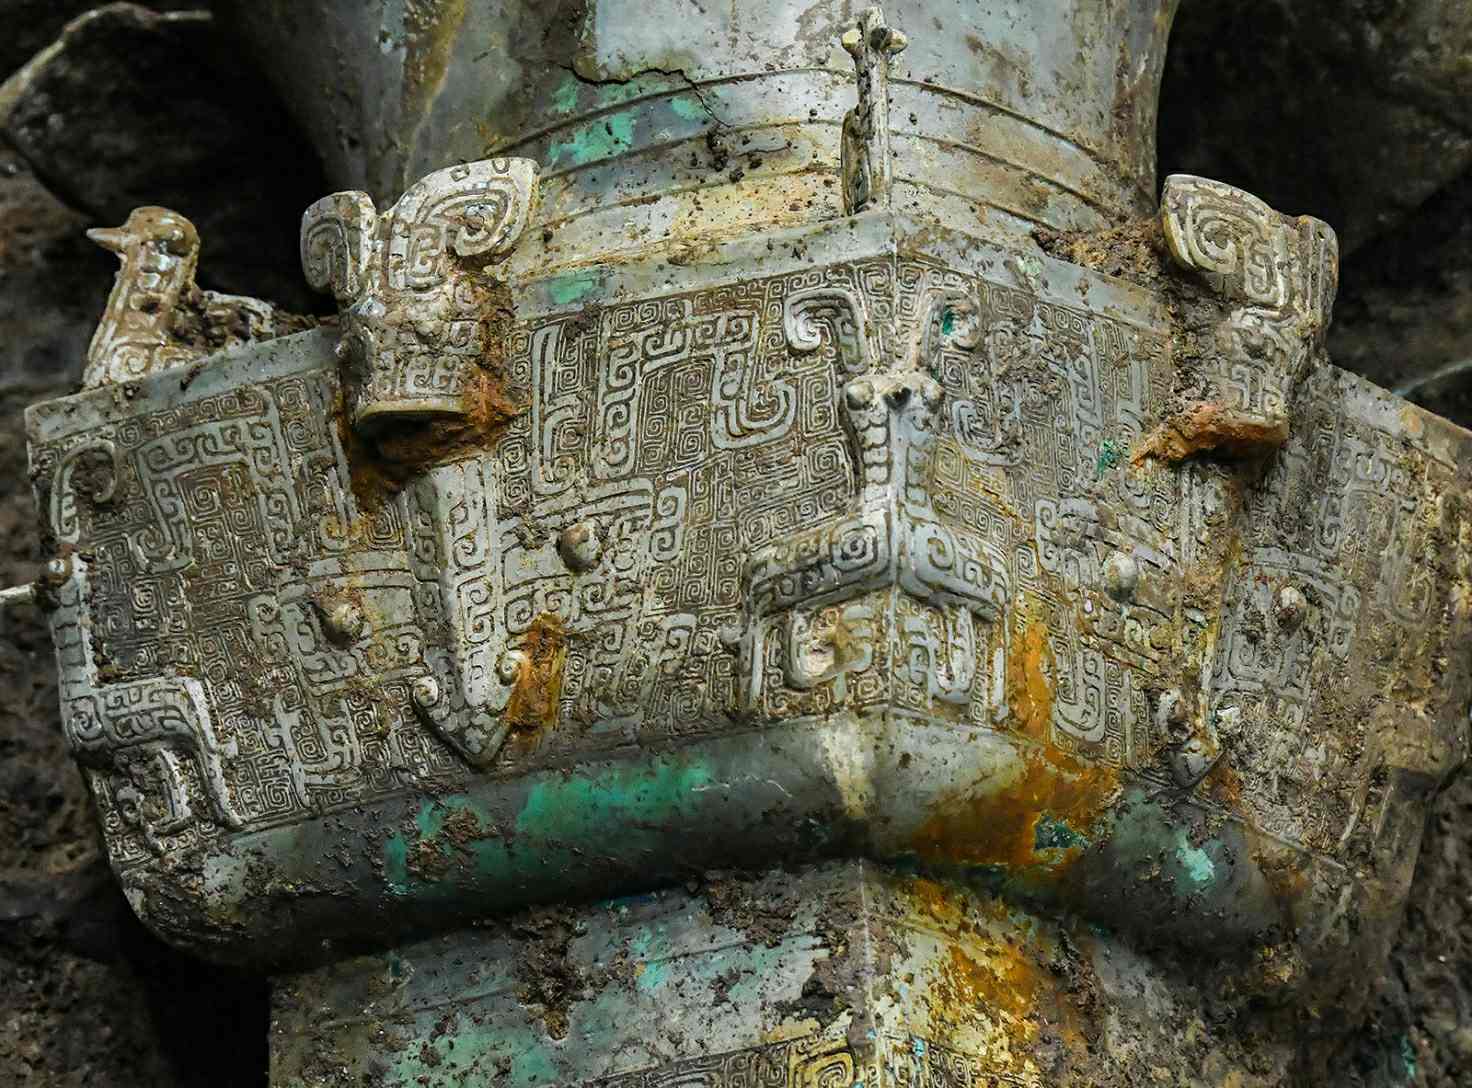 Cultural relics are unearthed at the No. 3 sacrificial pit of the Sanxingdui Ruins site in Deyang, Sichuan province, China, March 20, 2021.